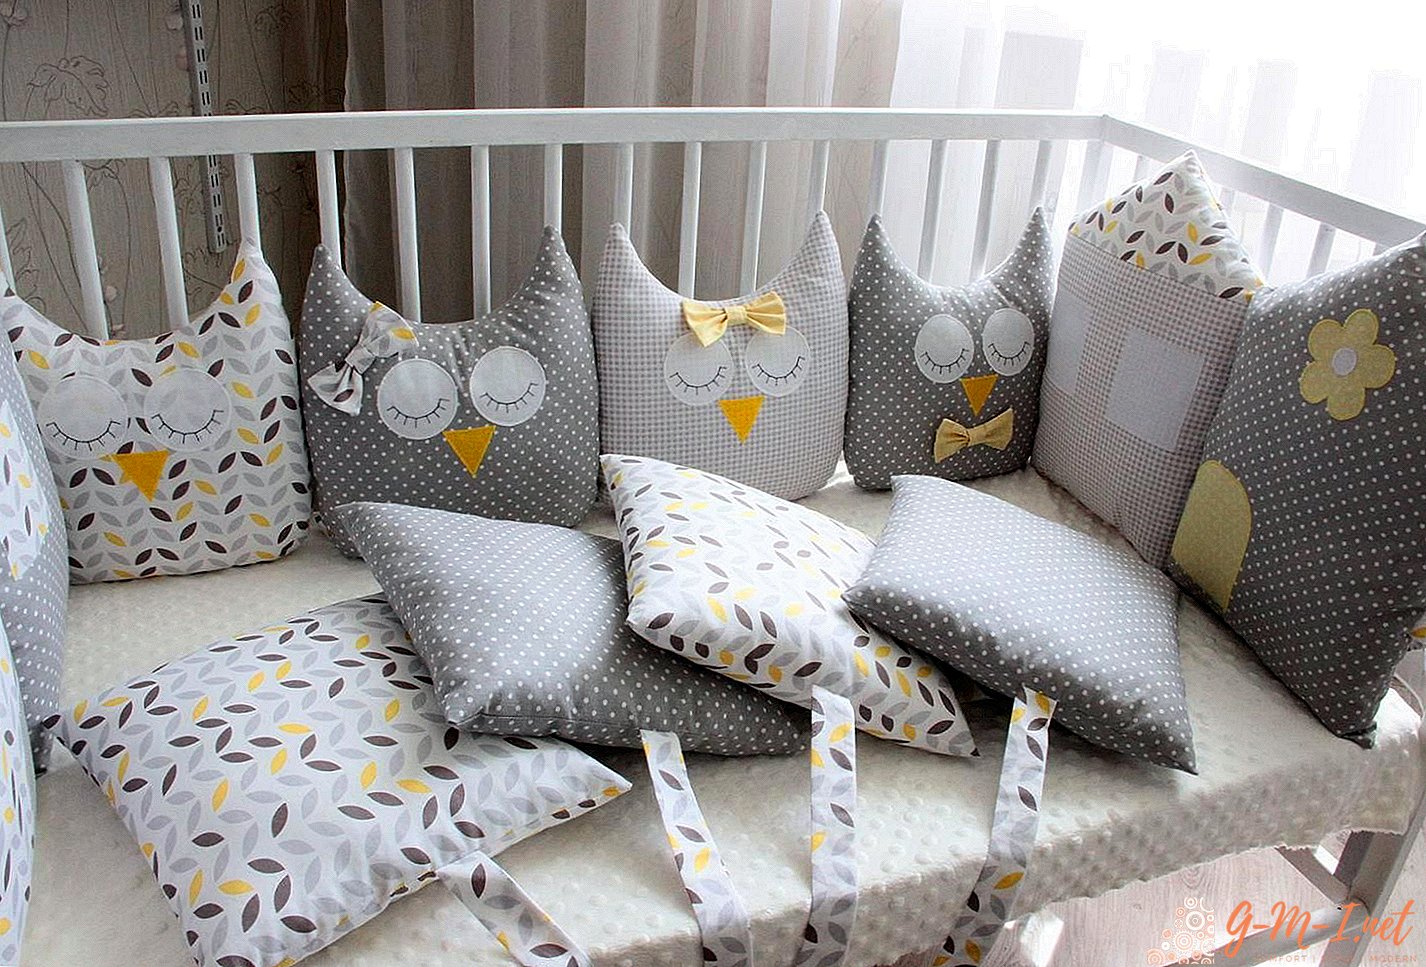 Pillows in the crib for newborns do-it-yourself